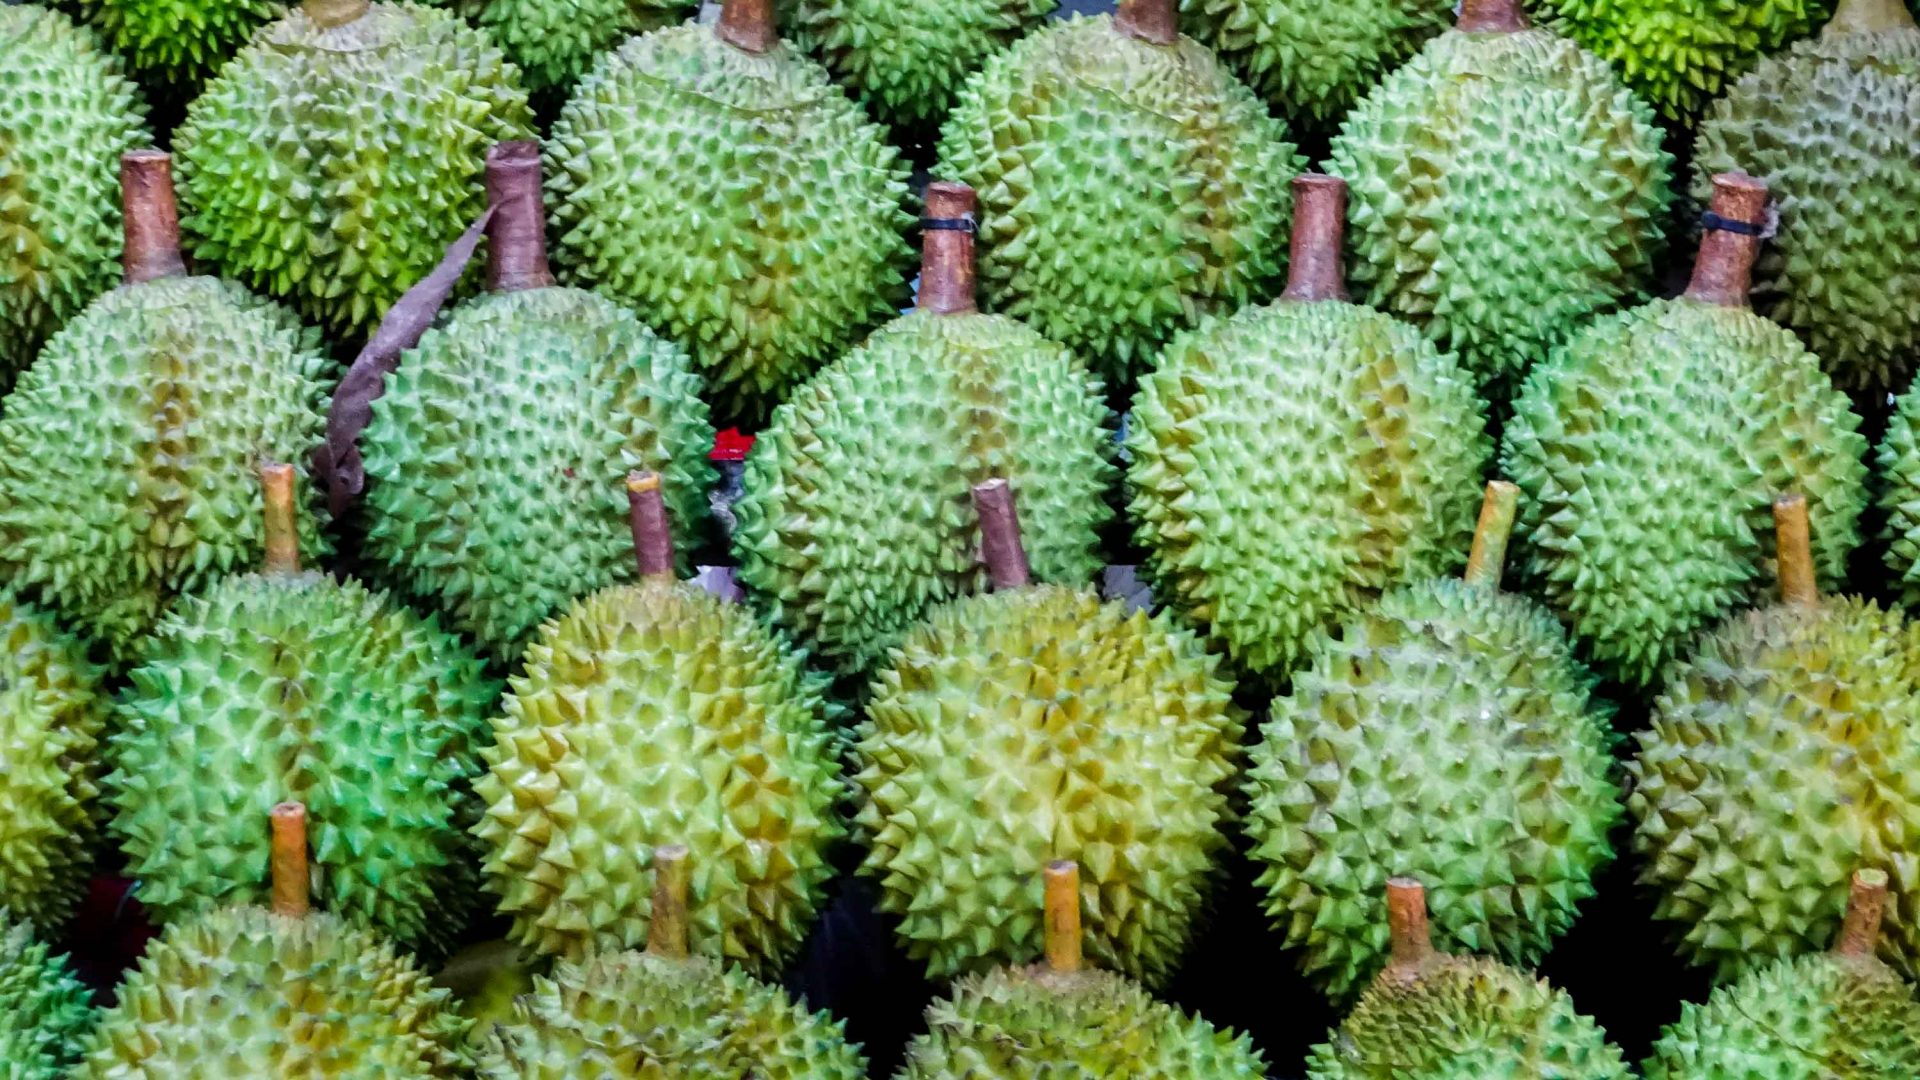 Banned on buses and used in beer: What’s driving Singapore’s durian fruit renaissance?